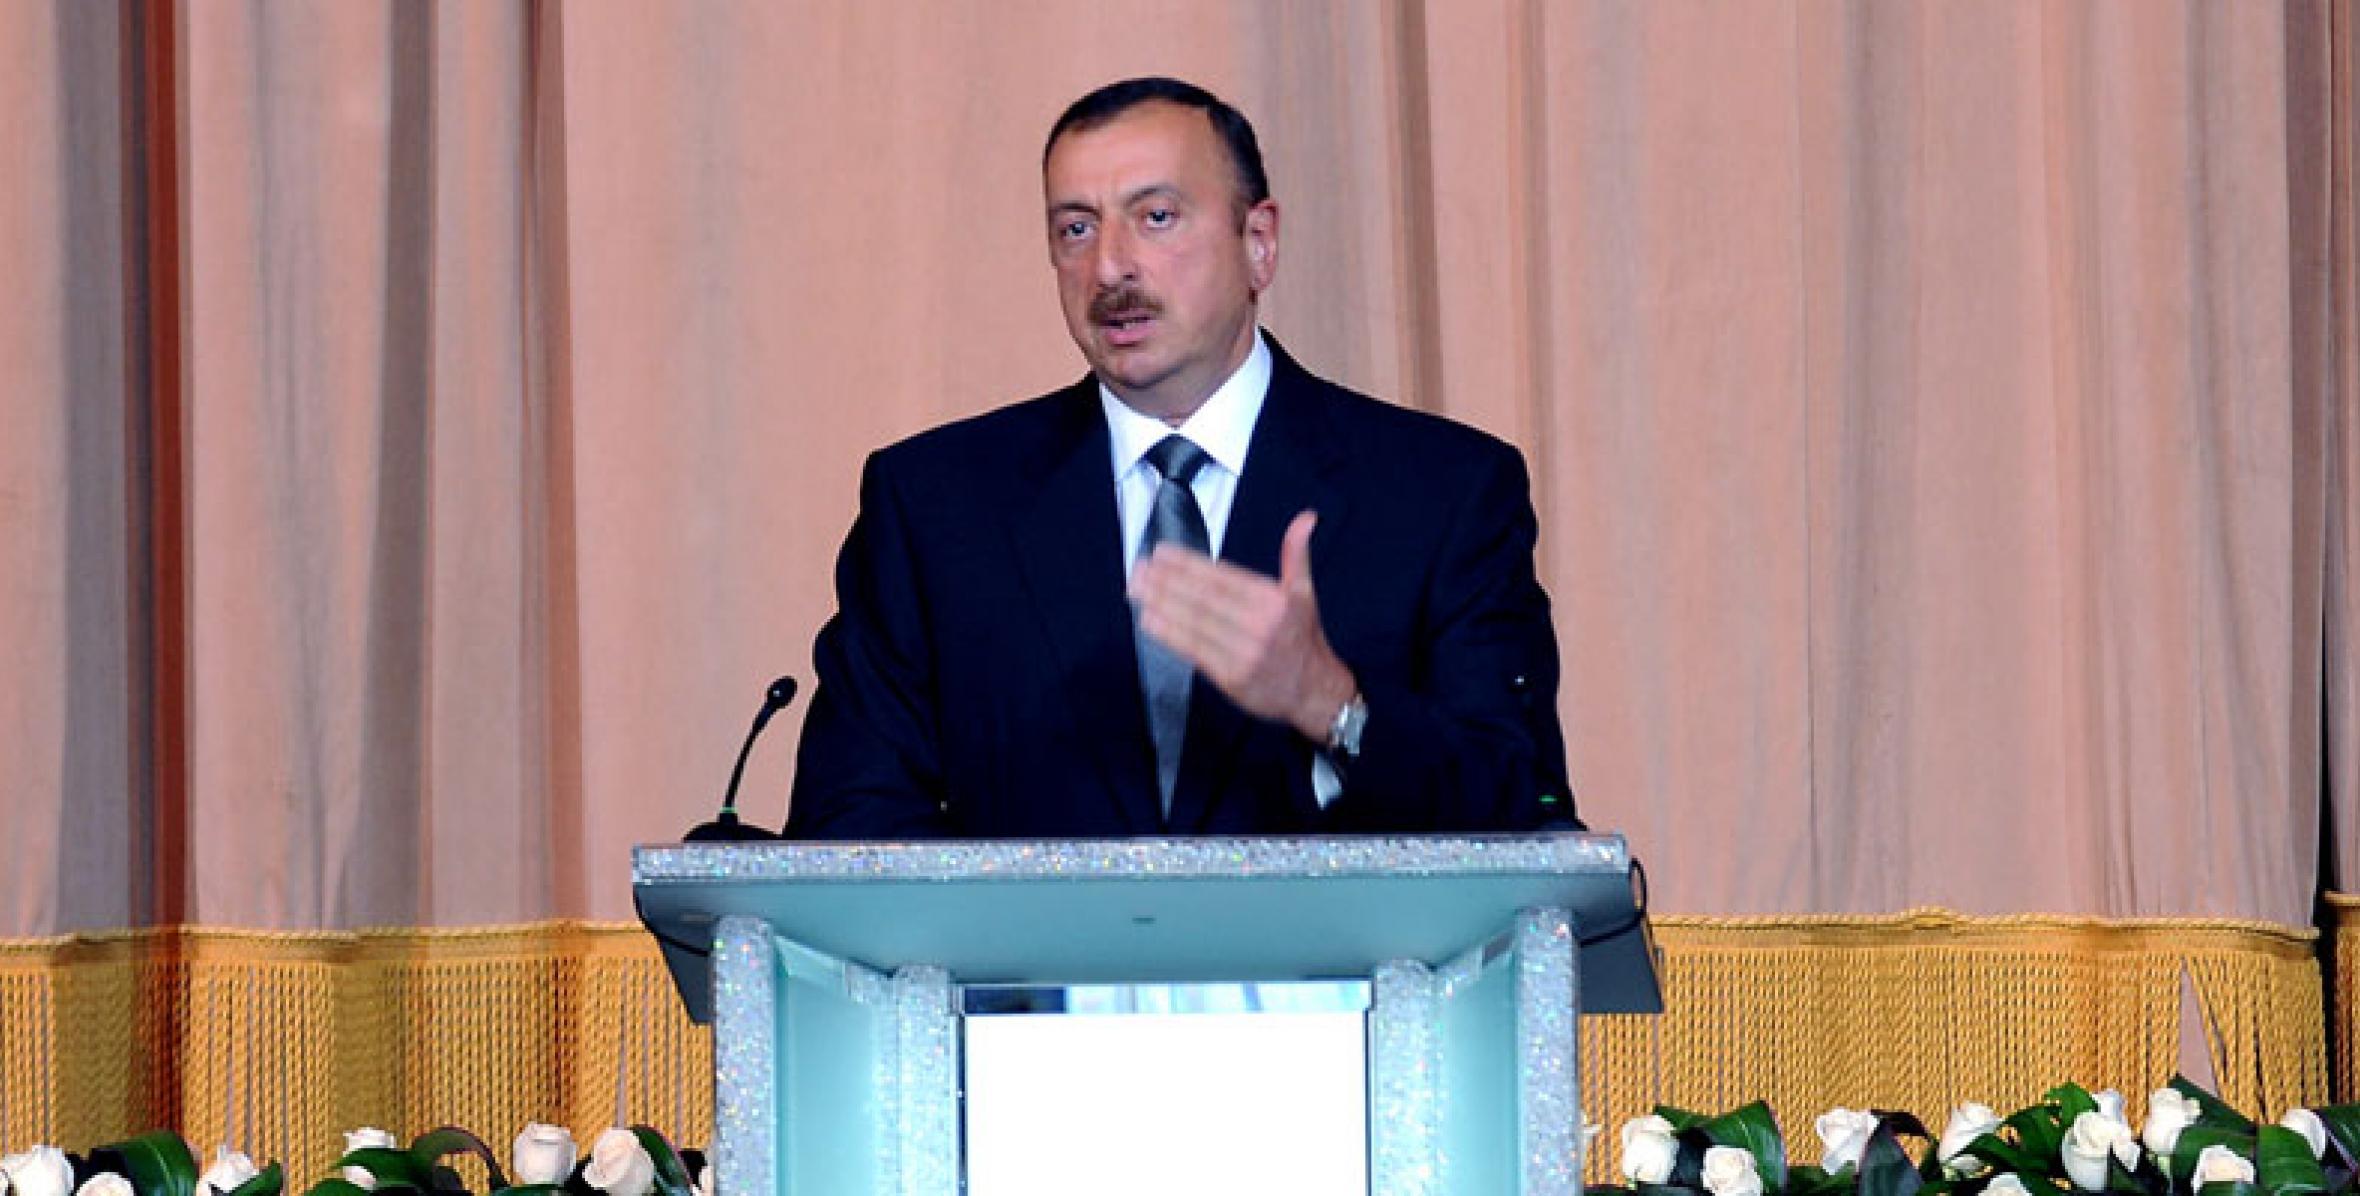 Speech by President Ilham Aliyev at an official reception marking 28 May, the Day of the Republic